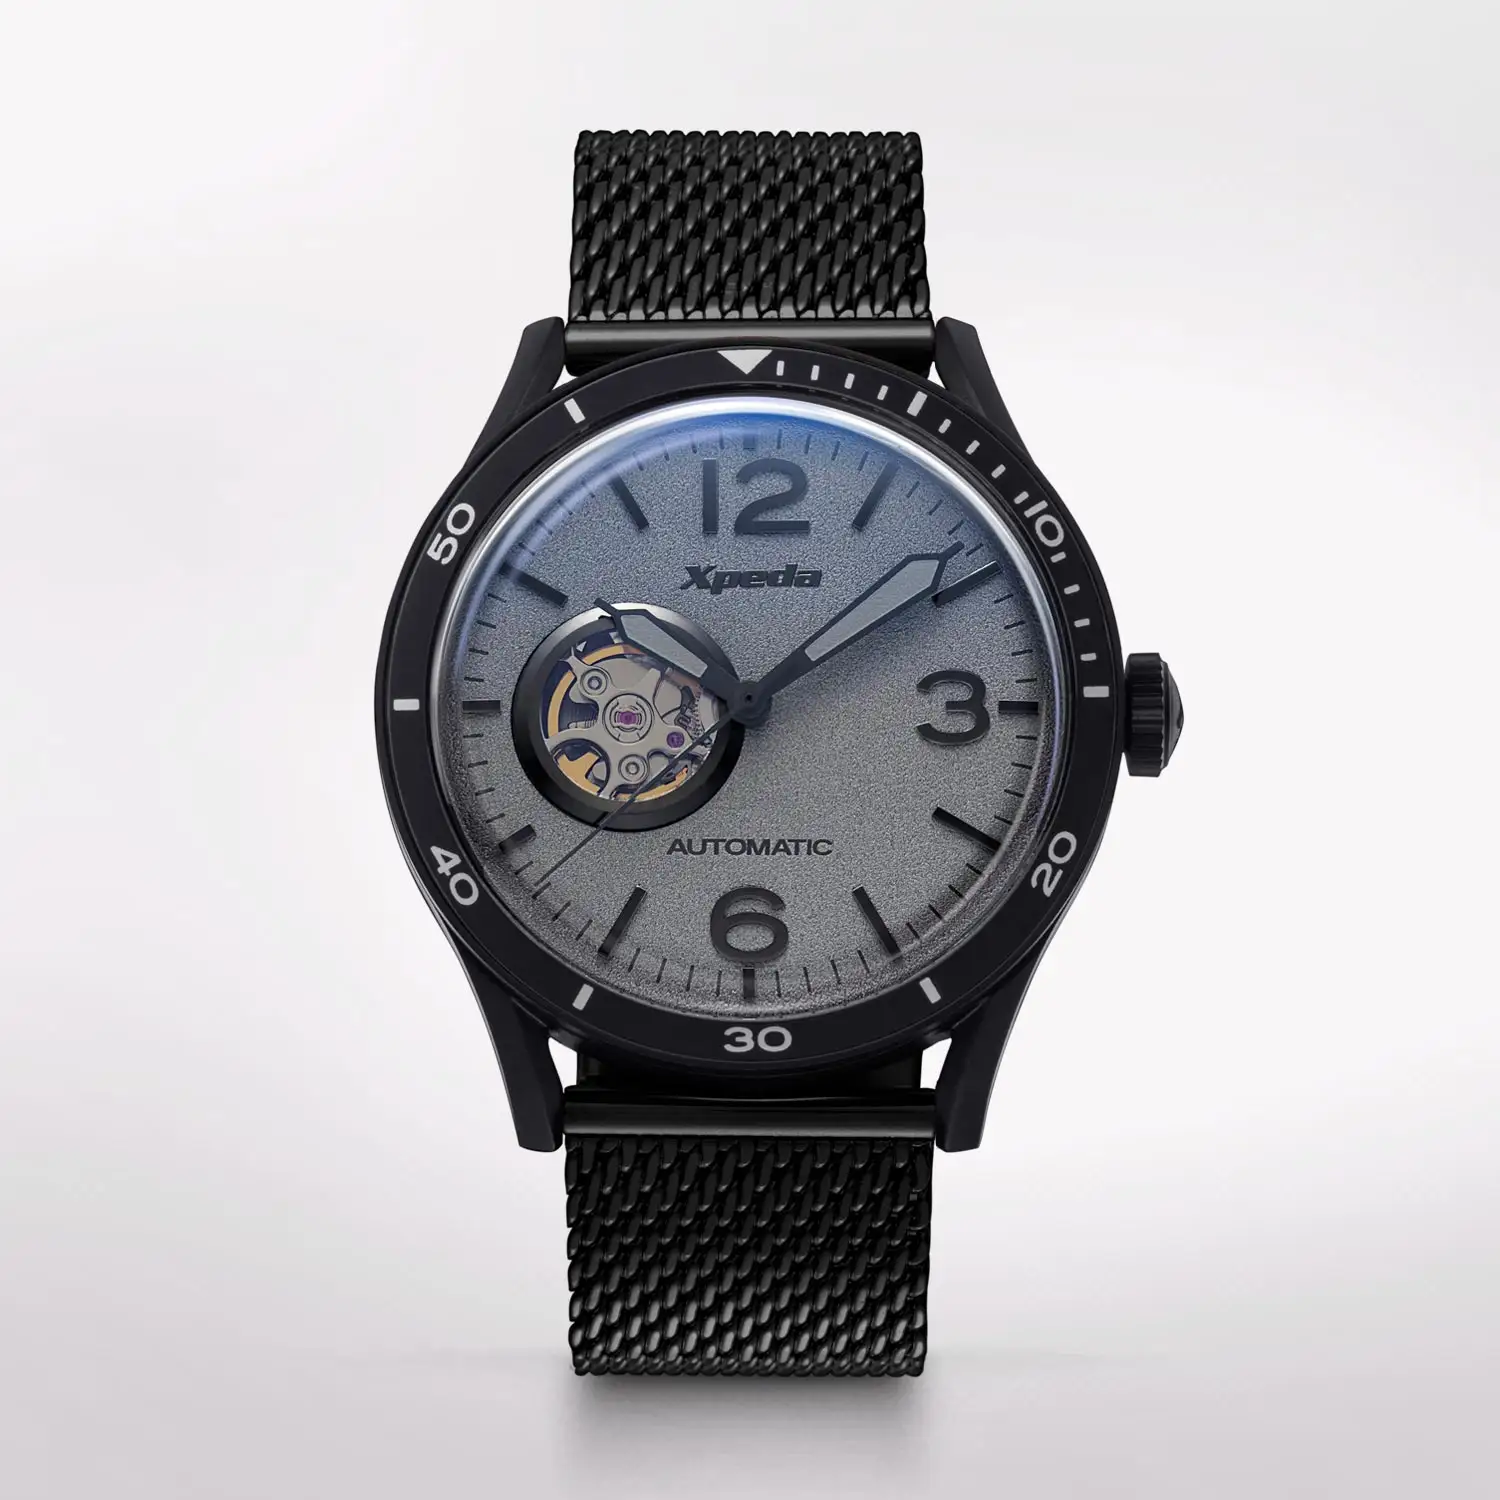 TIME BOX TC807B2 hot sales stainless steel automatic mechanical 5 ATM waterproof curved lens pilot watches men wrist